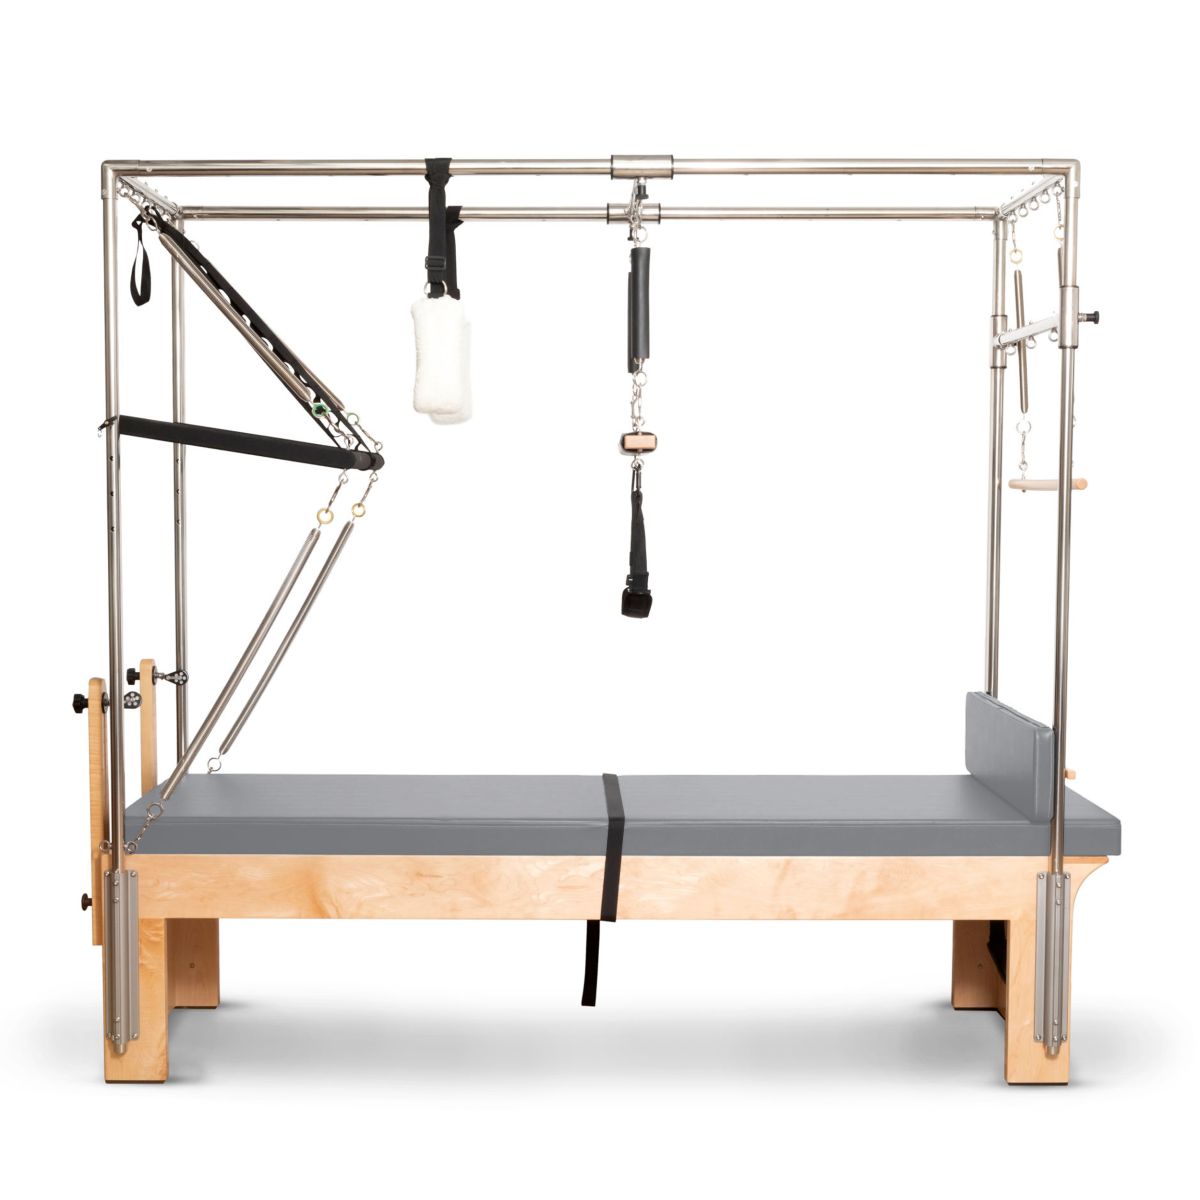 Pilates Machines for sale in Cadillac, Michigan, Facebook Marketplace